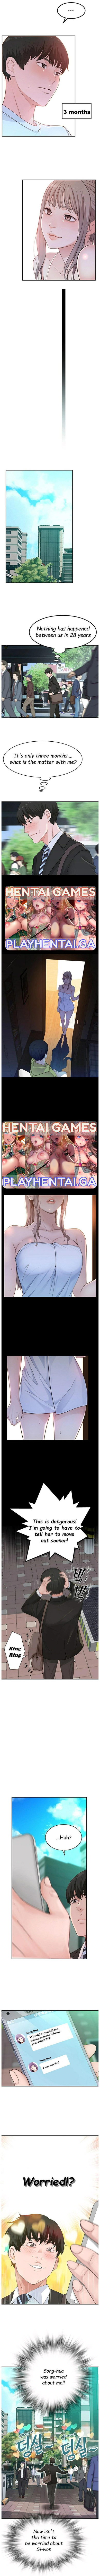 Great Fuck 우리 사이 | BETWEEN US Ch. 2 Rica - Page 7